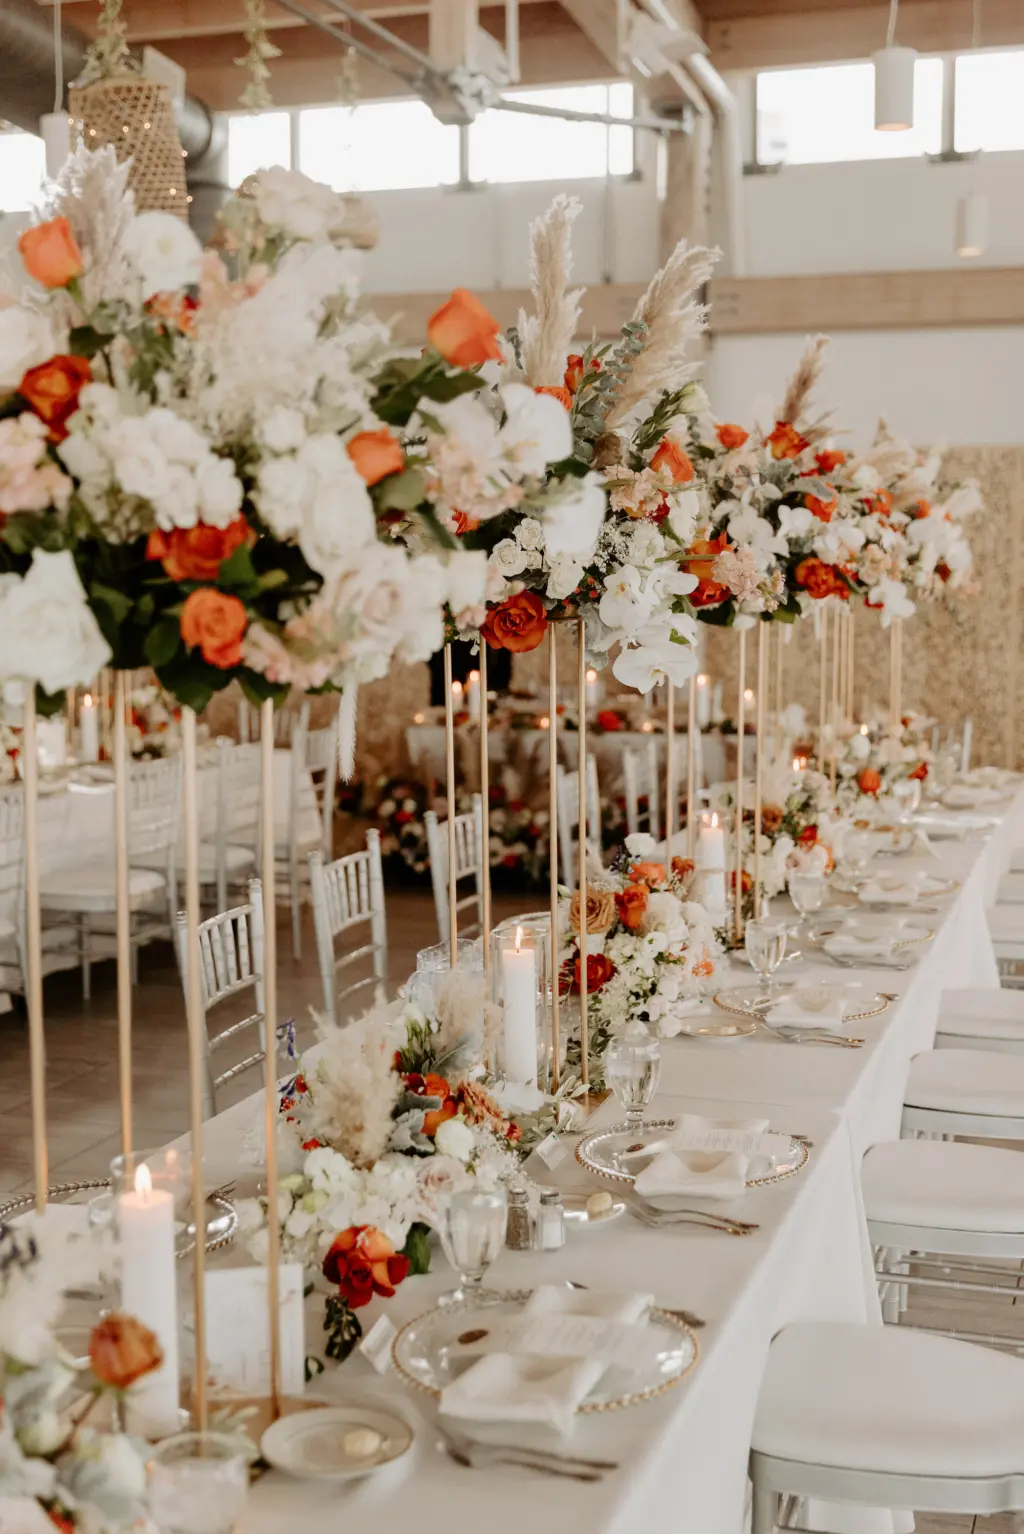 Tall Flower Stand Wedding Reception Centerpieces for Long Feasting Table with Pampas Grass, Orange, Pink, and White Roses, Carnations, Hydrangeas, and Dried Florals